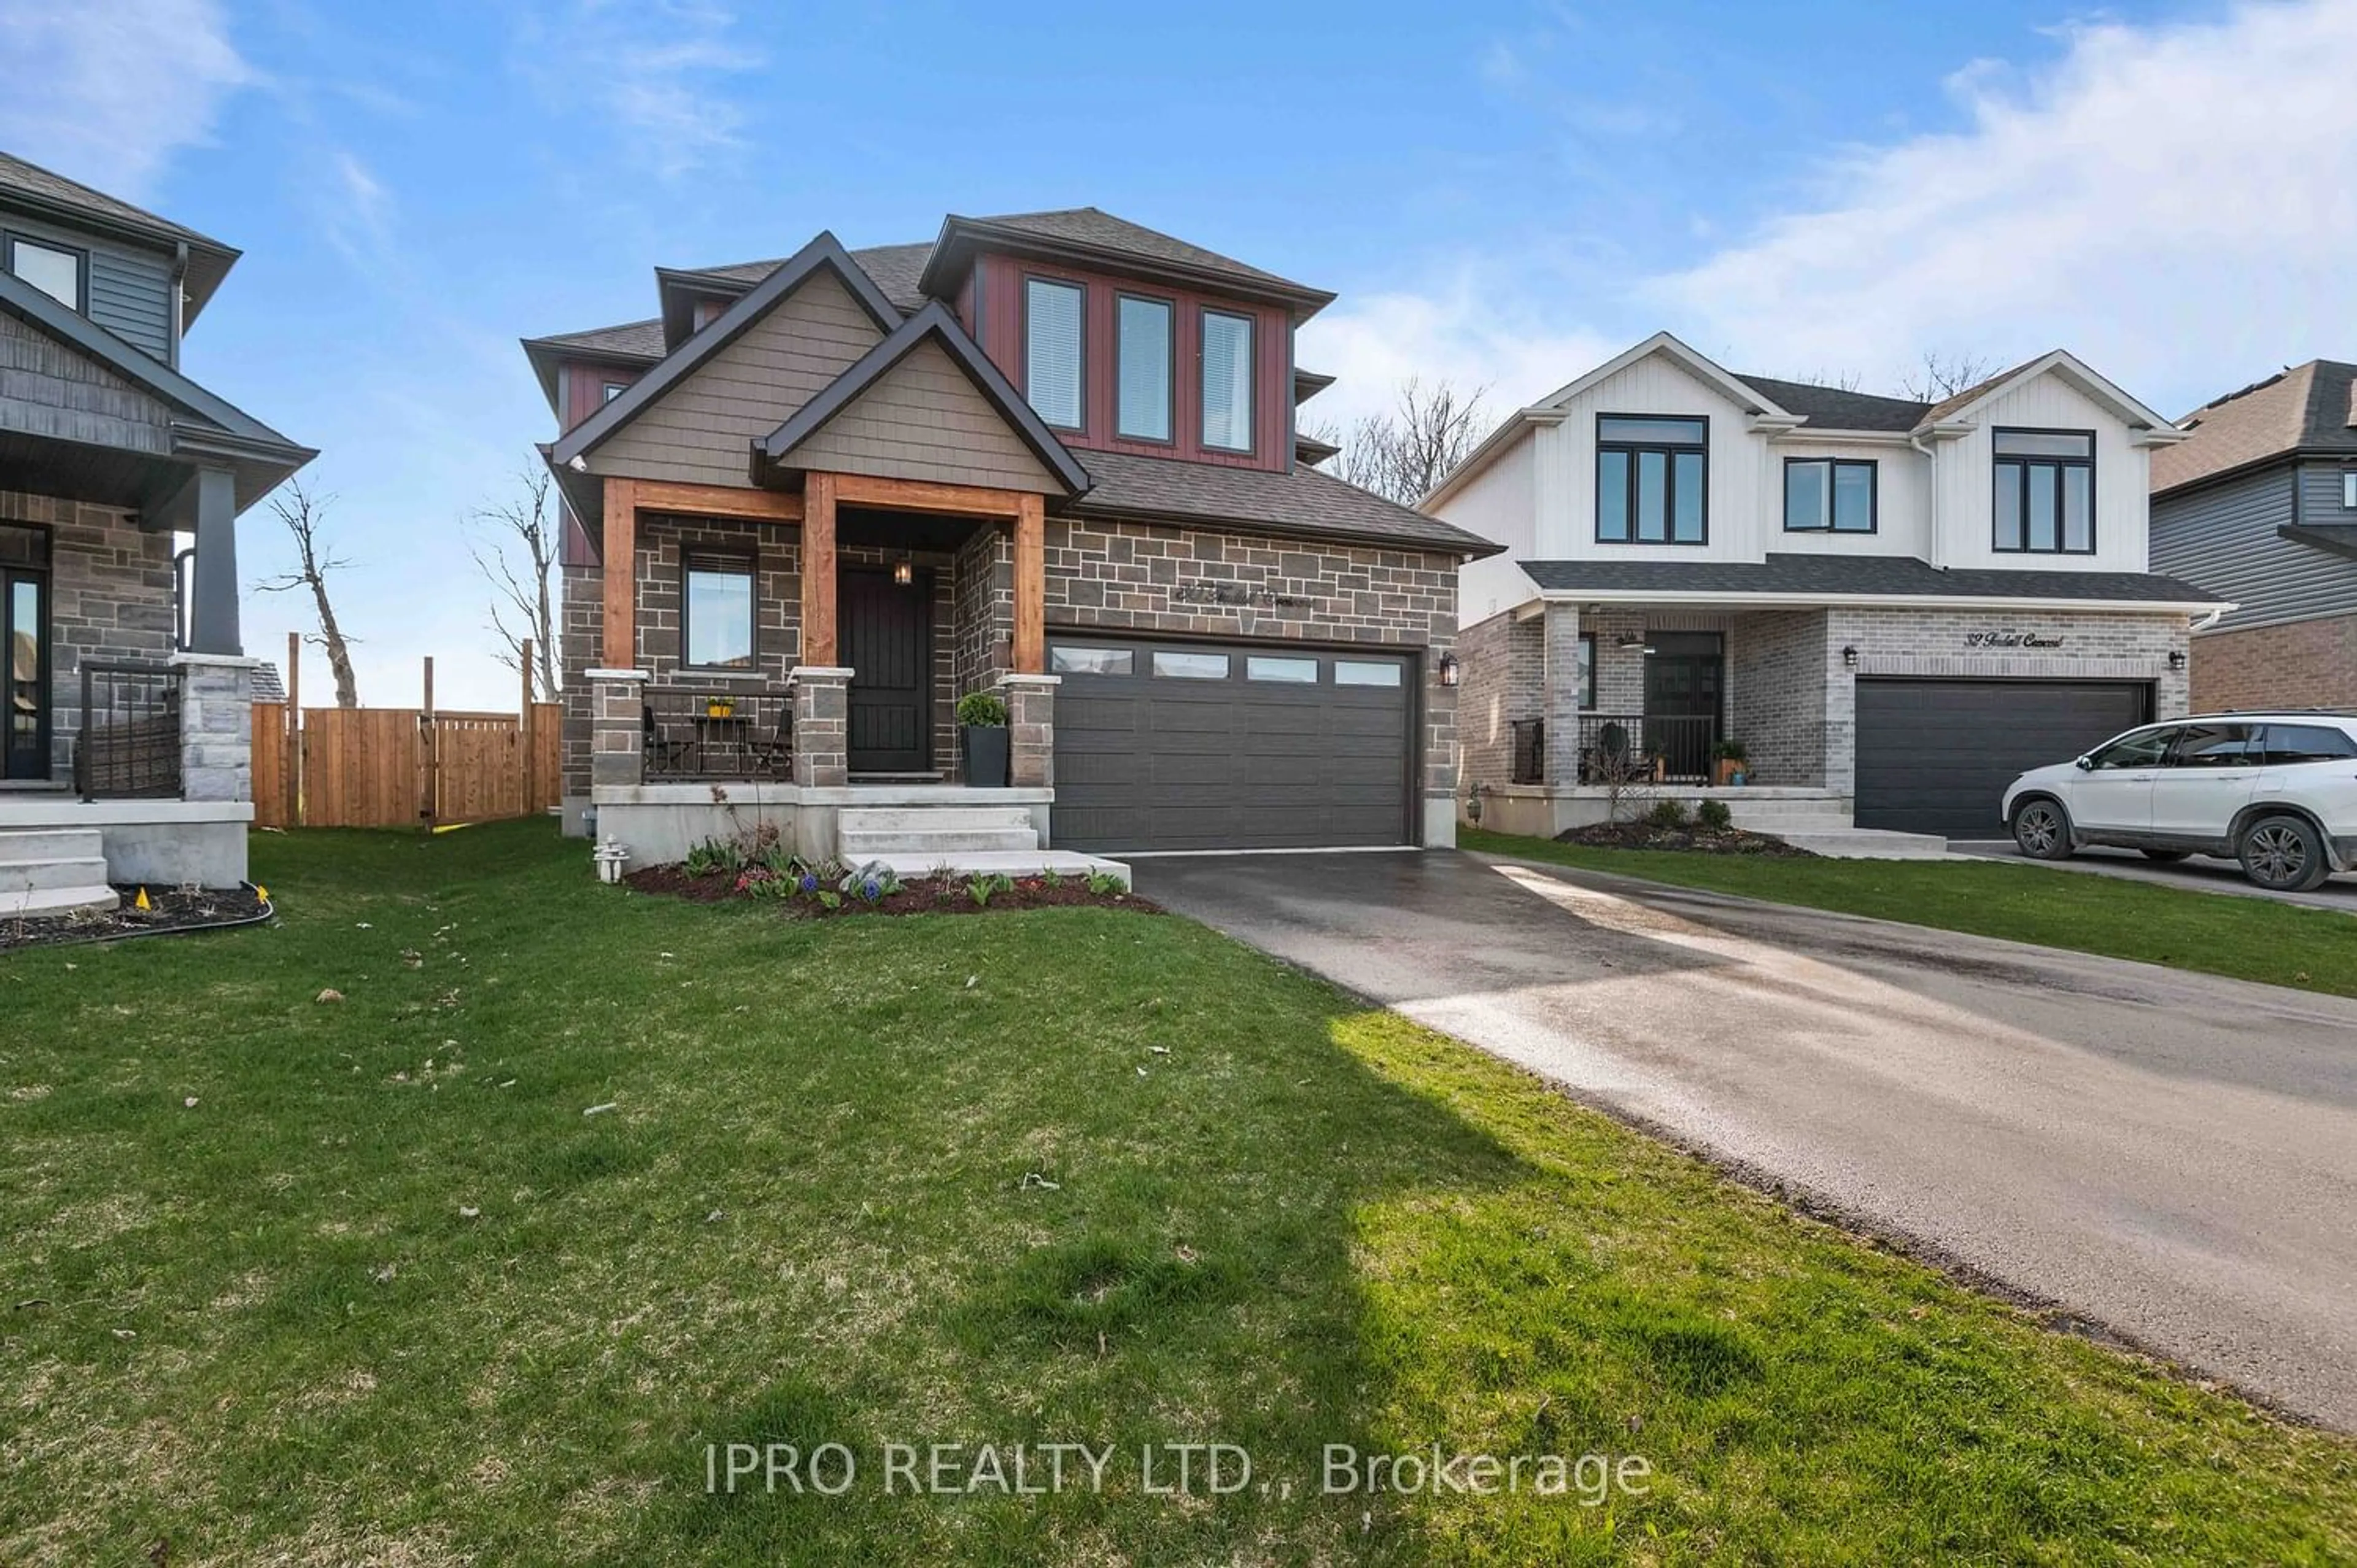 Frontside or backside of a home for 30 Tindall Cres, East Luther Grand Valley Ontario L9W 7R8